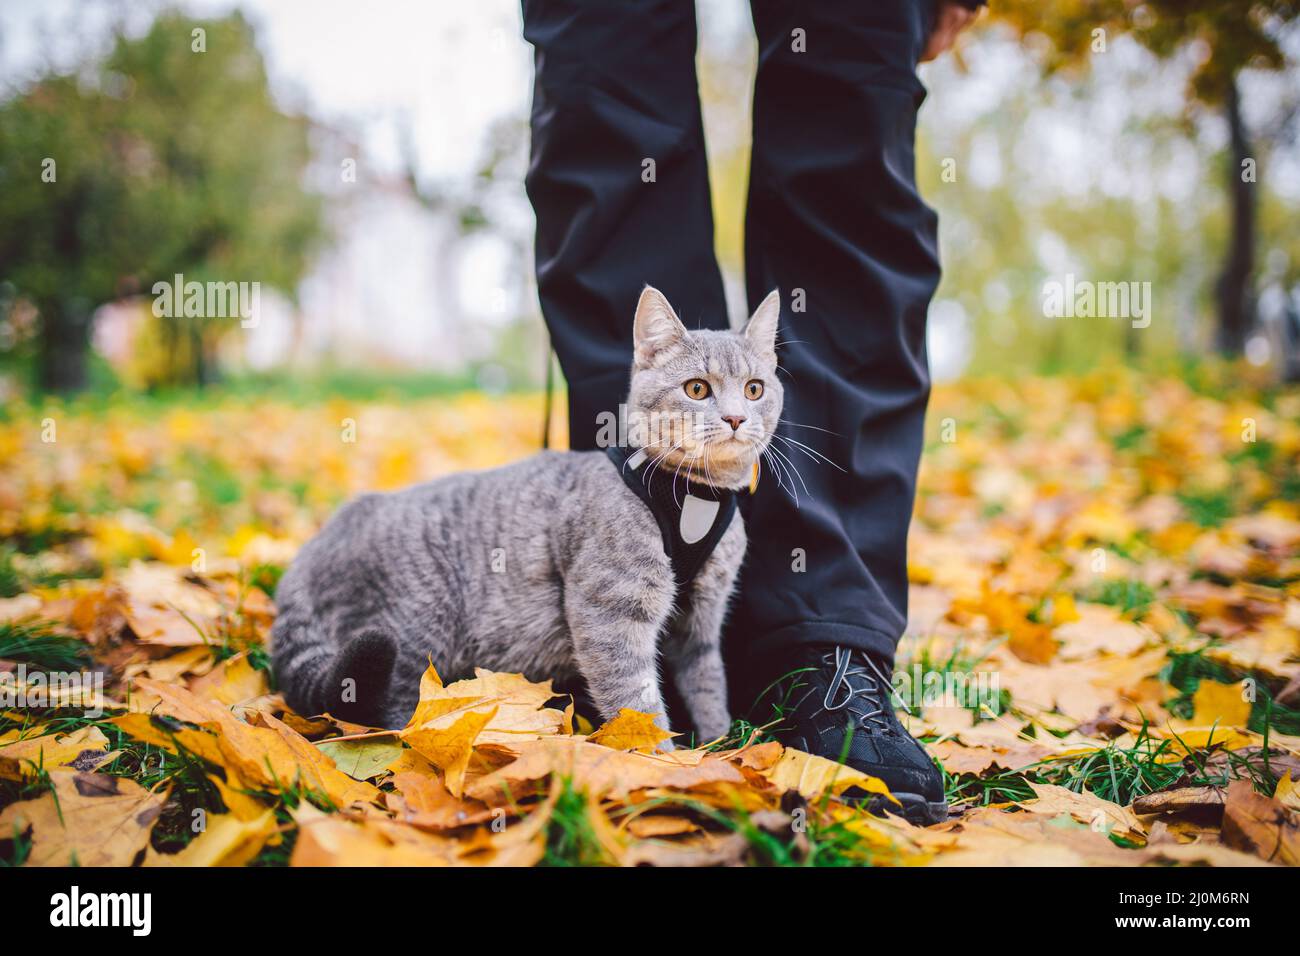 The topic is walking pets in nature. Close-up of leg and a cat on a sled in a park in yellow casts. A man with a cat on a leash Stock Photo